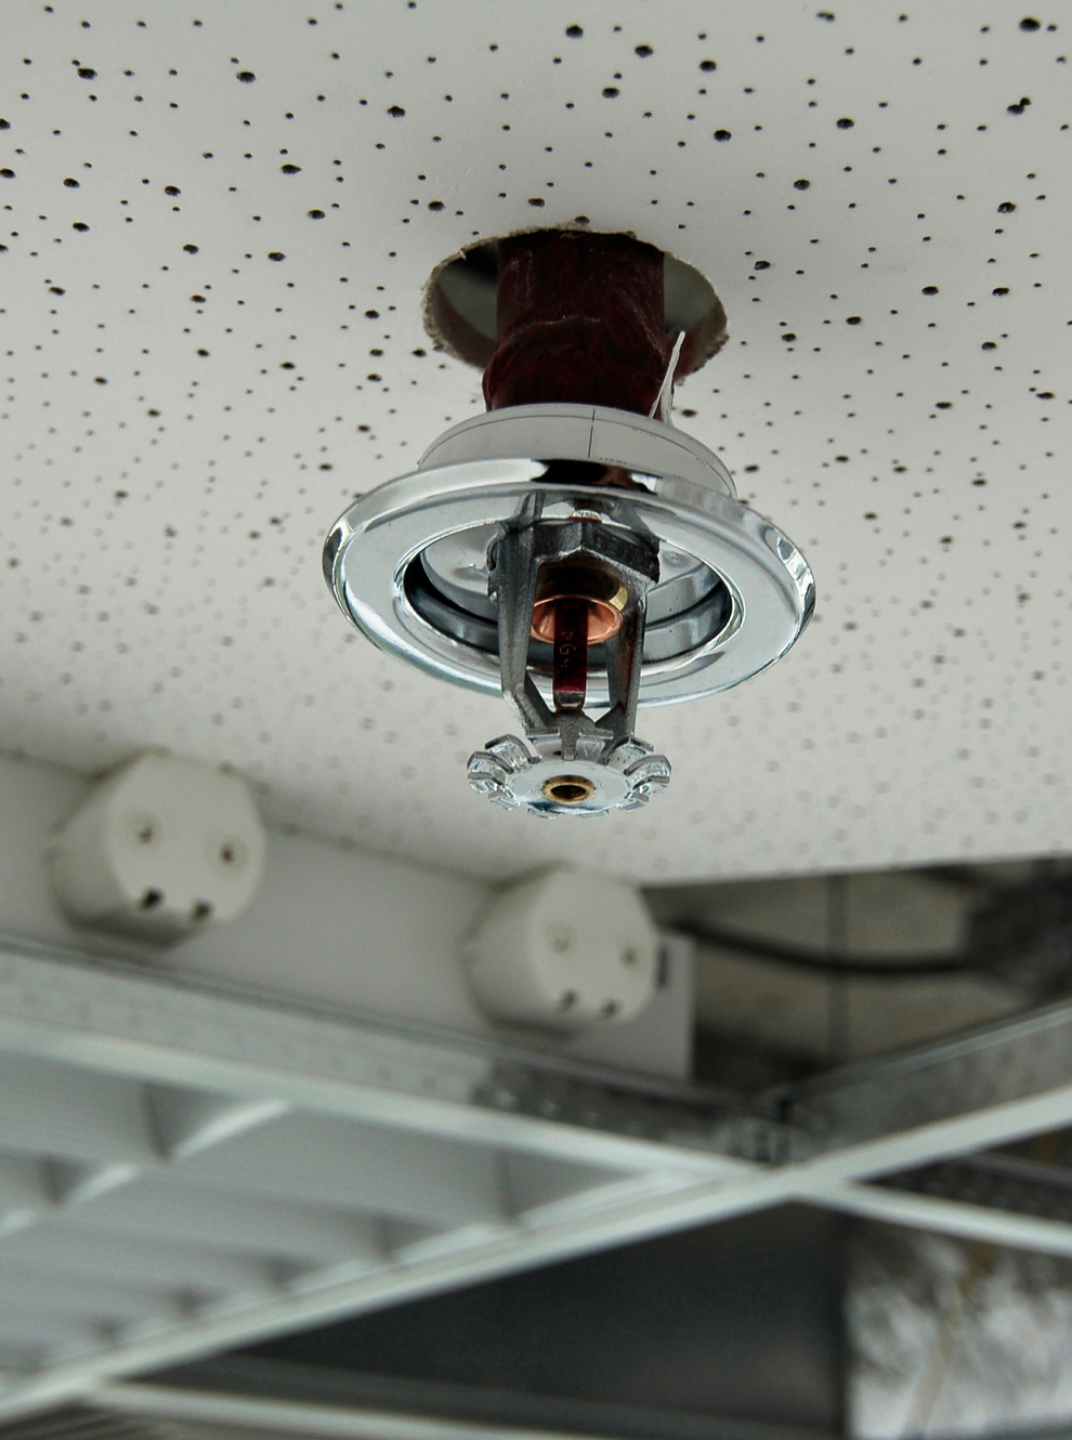 Best Fire Sprinkler Systems Services Company Near You - PA Mechanical